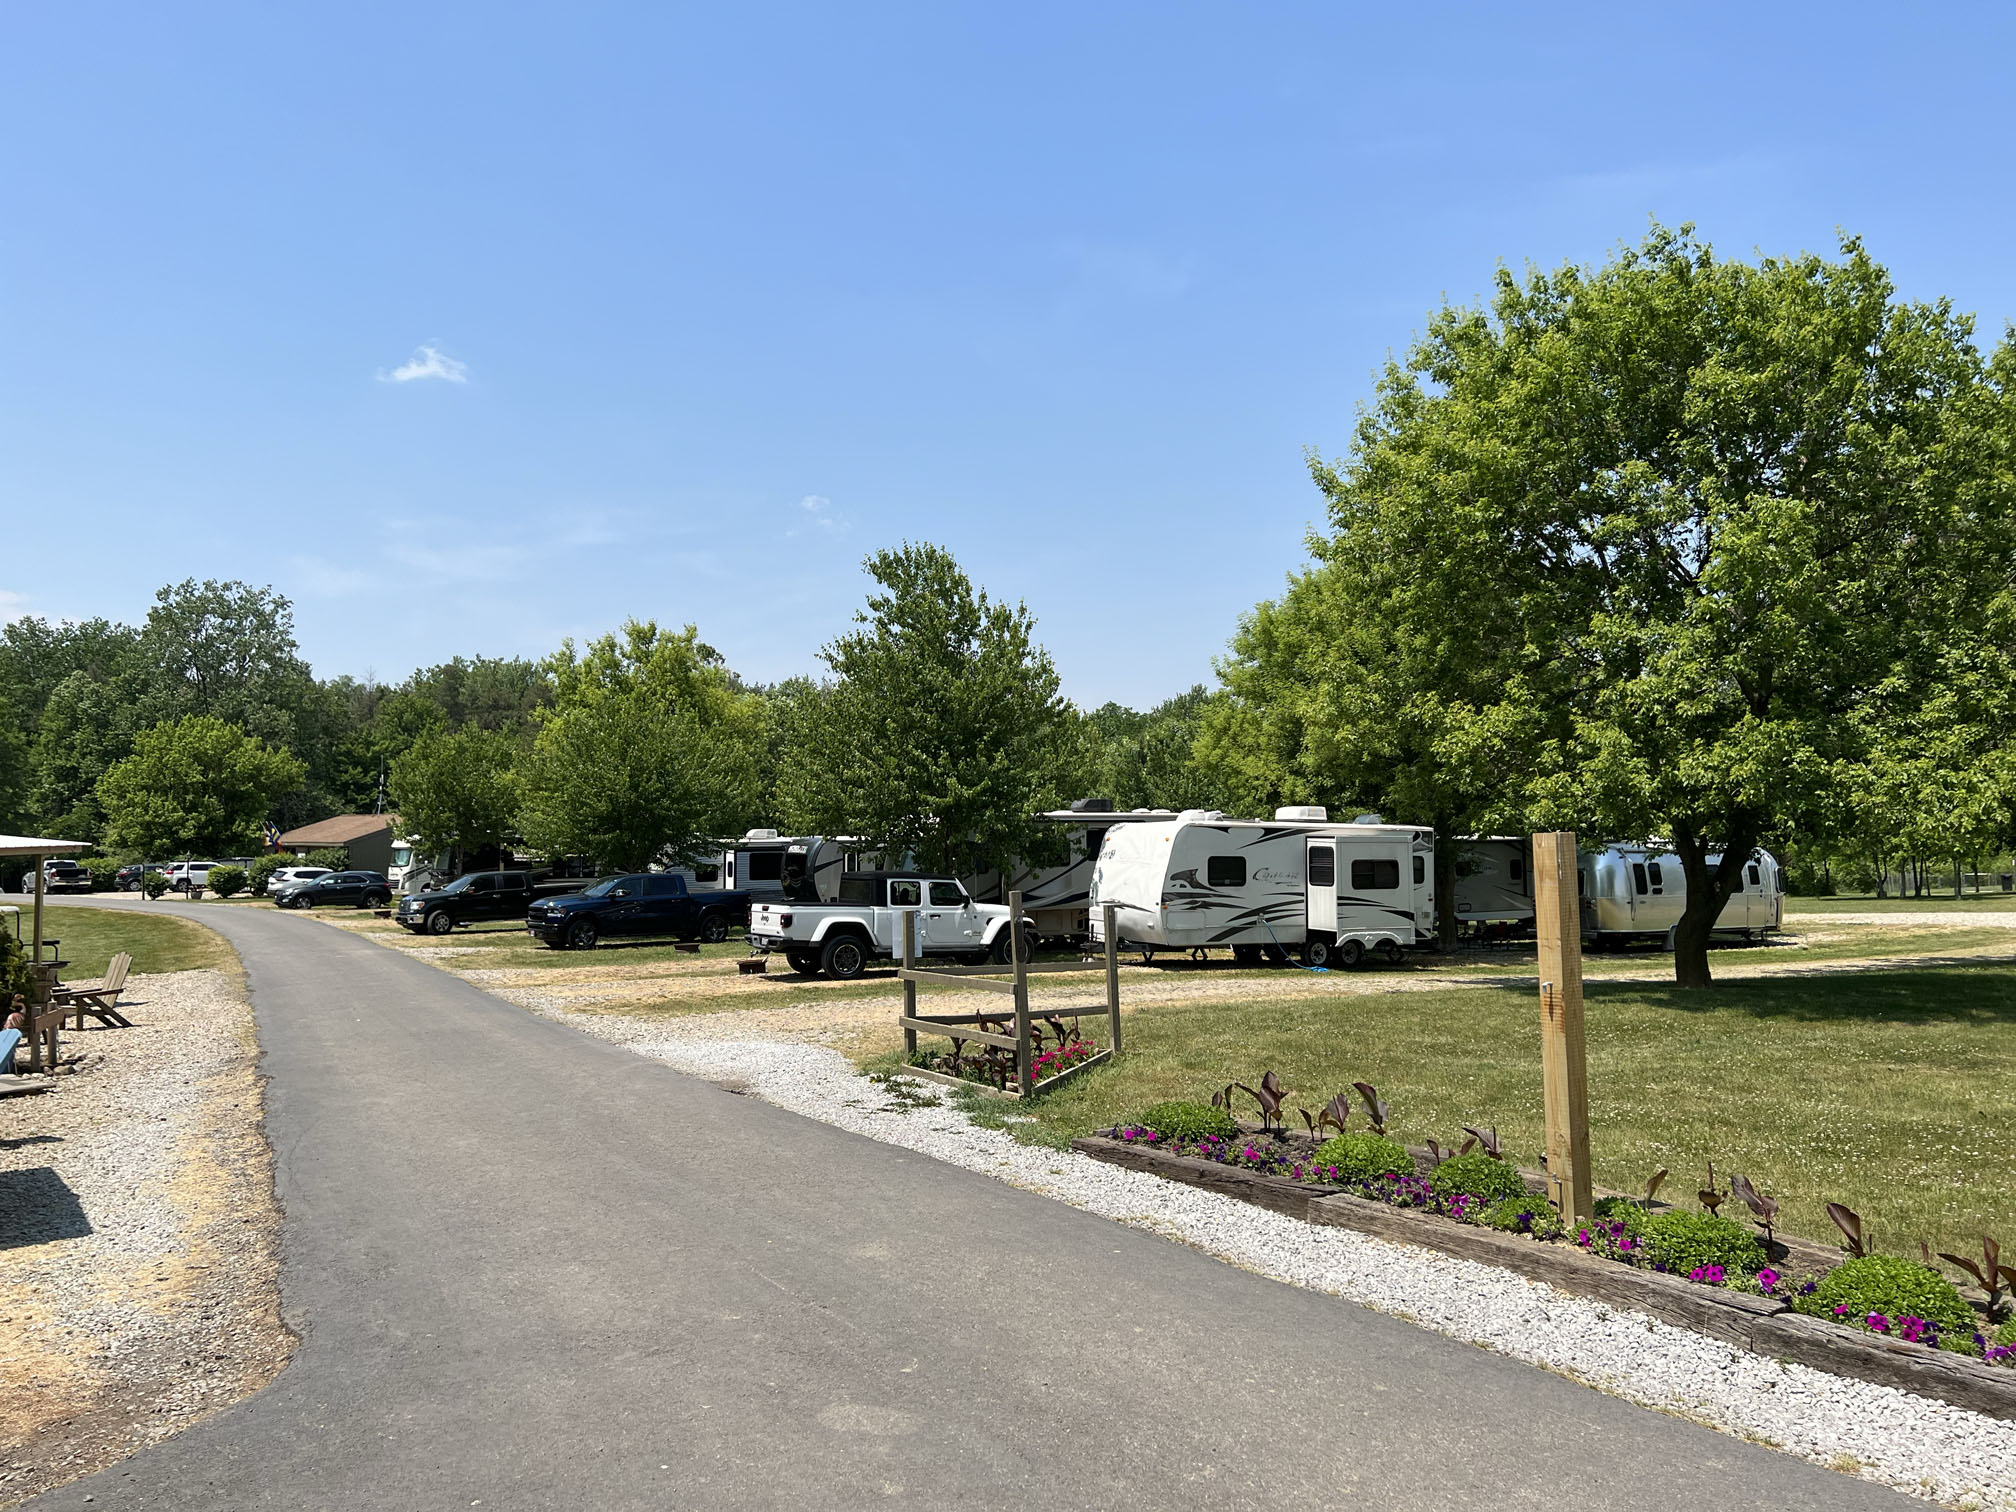 View of the camper pull through sites